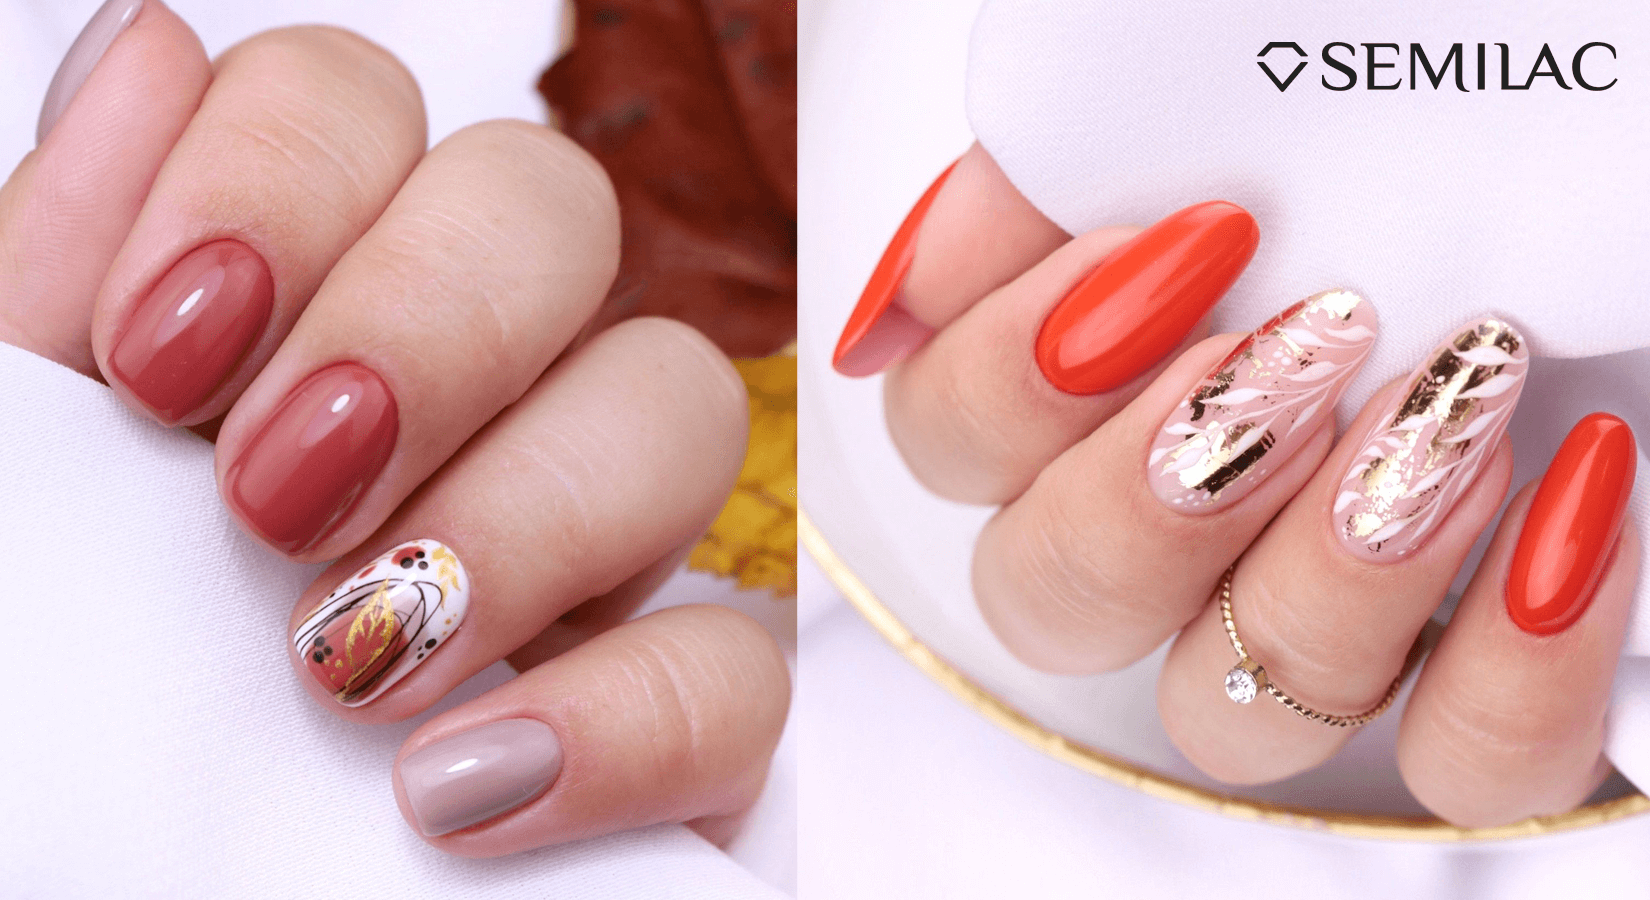 The Art of Fall Glam: Transform Your Nails with Semilac UV Gel Polish